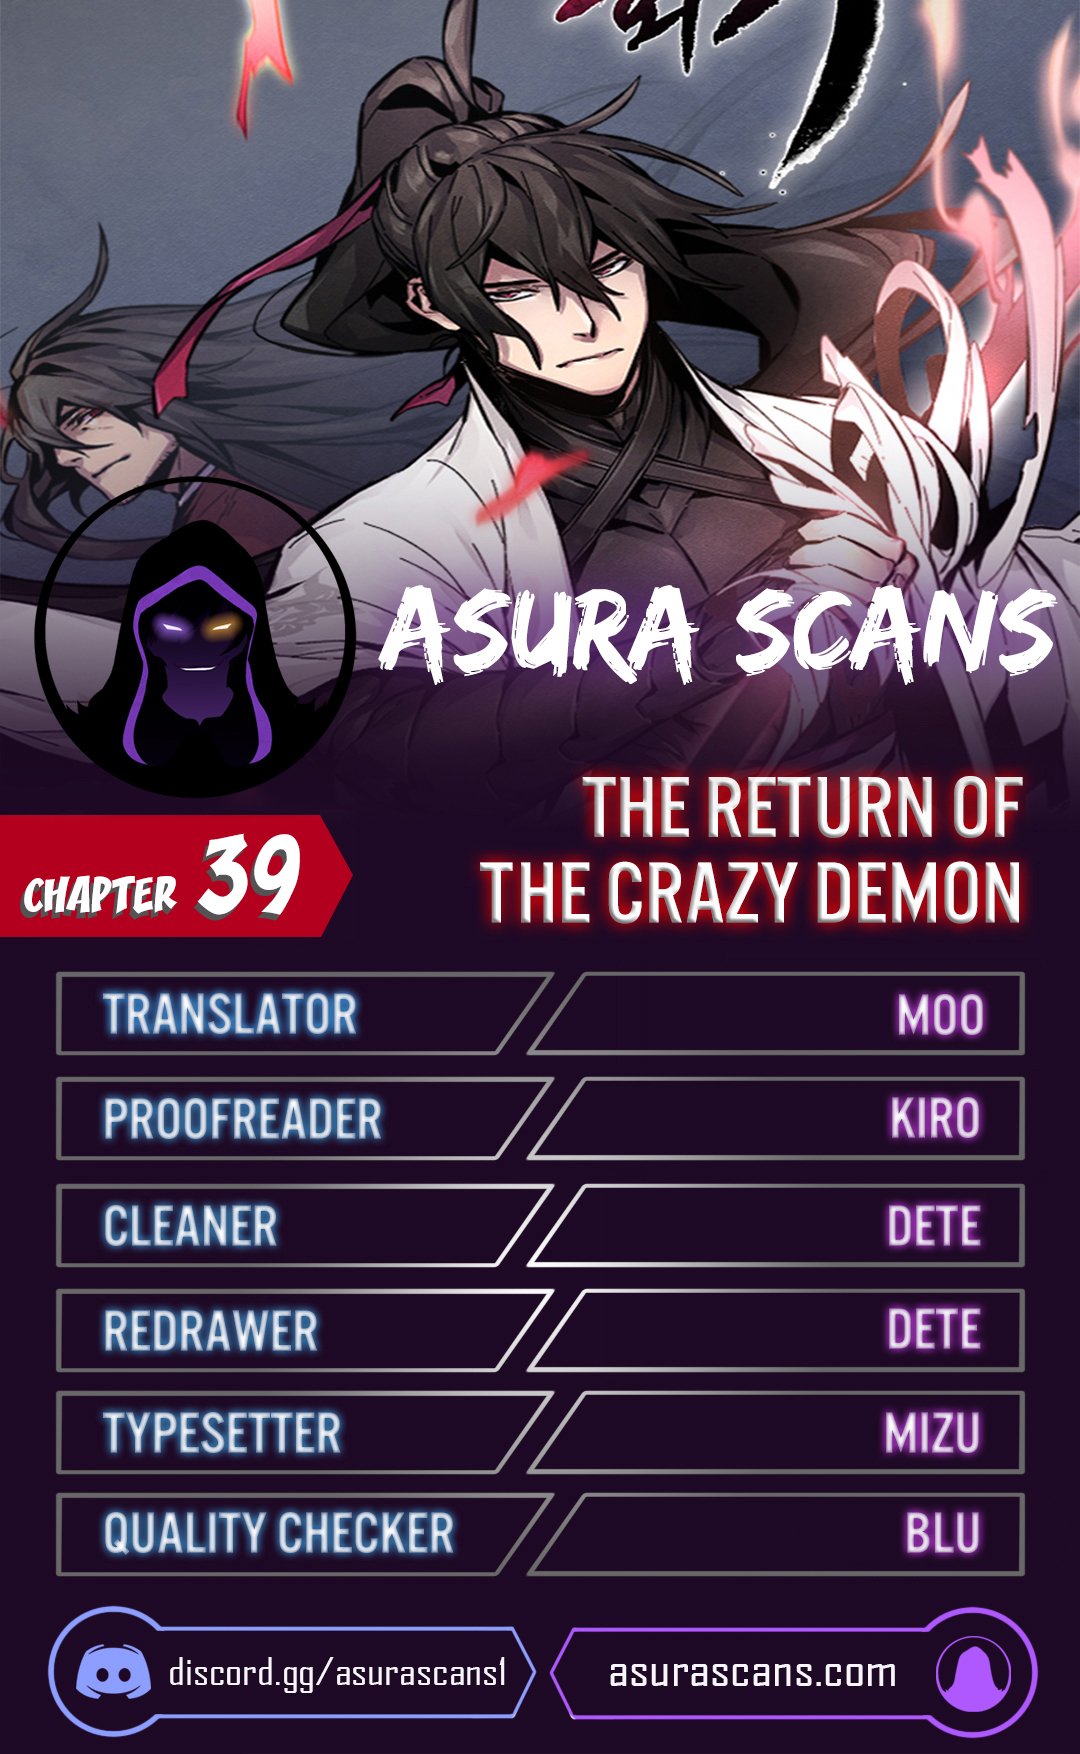 The Return of the Crazy Demon - Chapter 18580 - Image 1